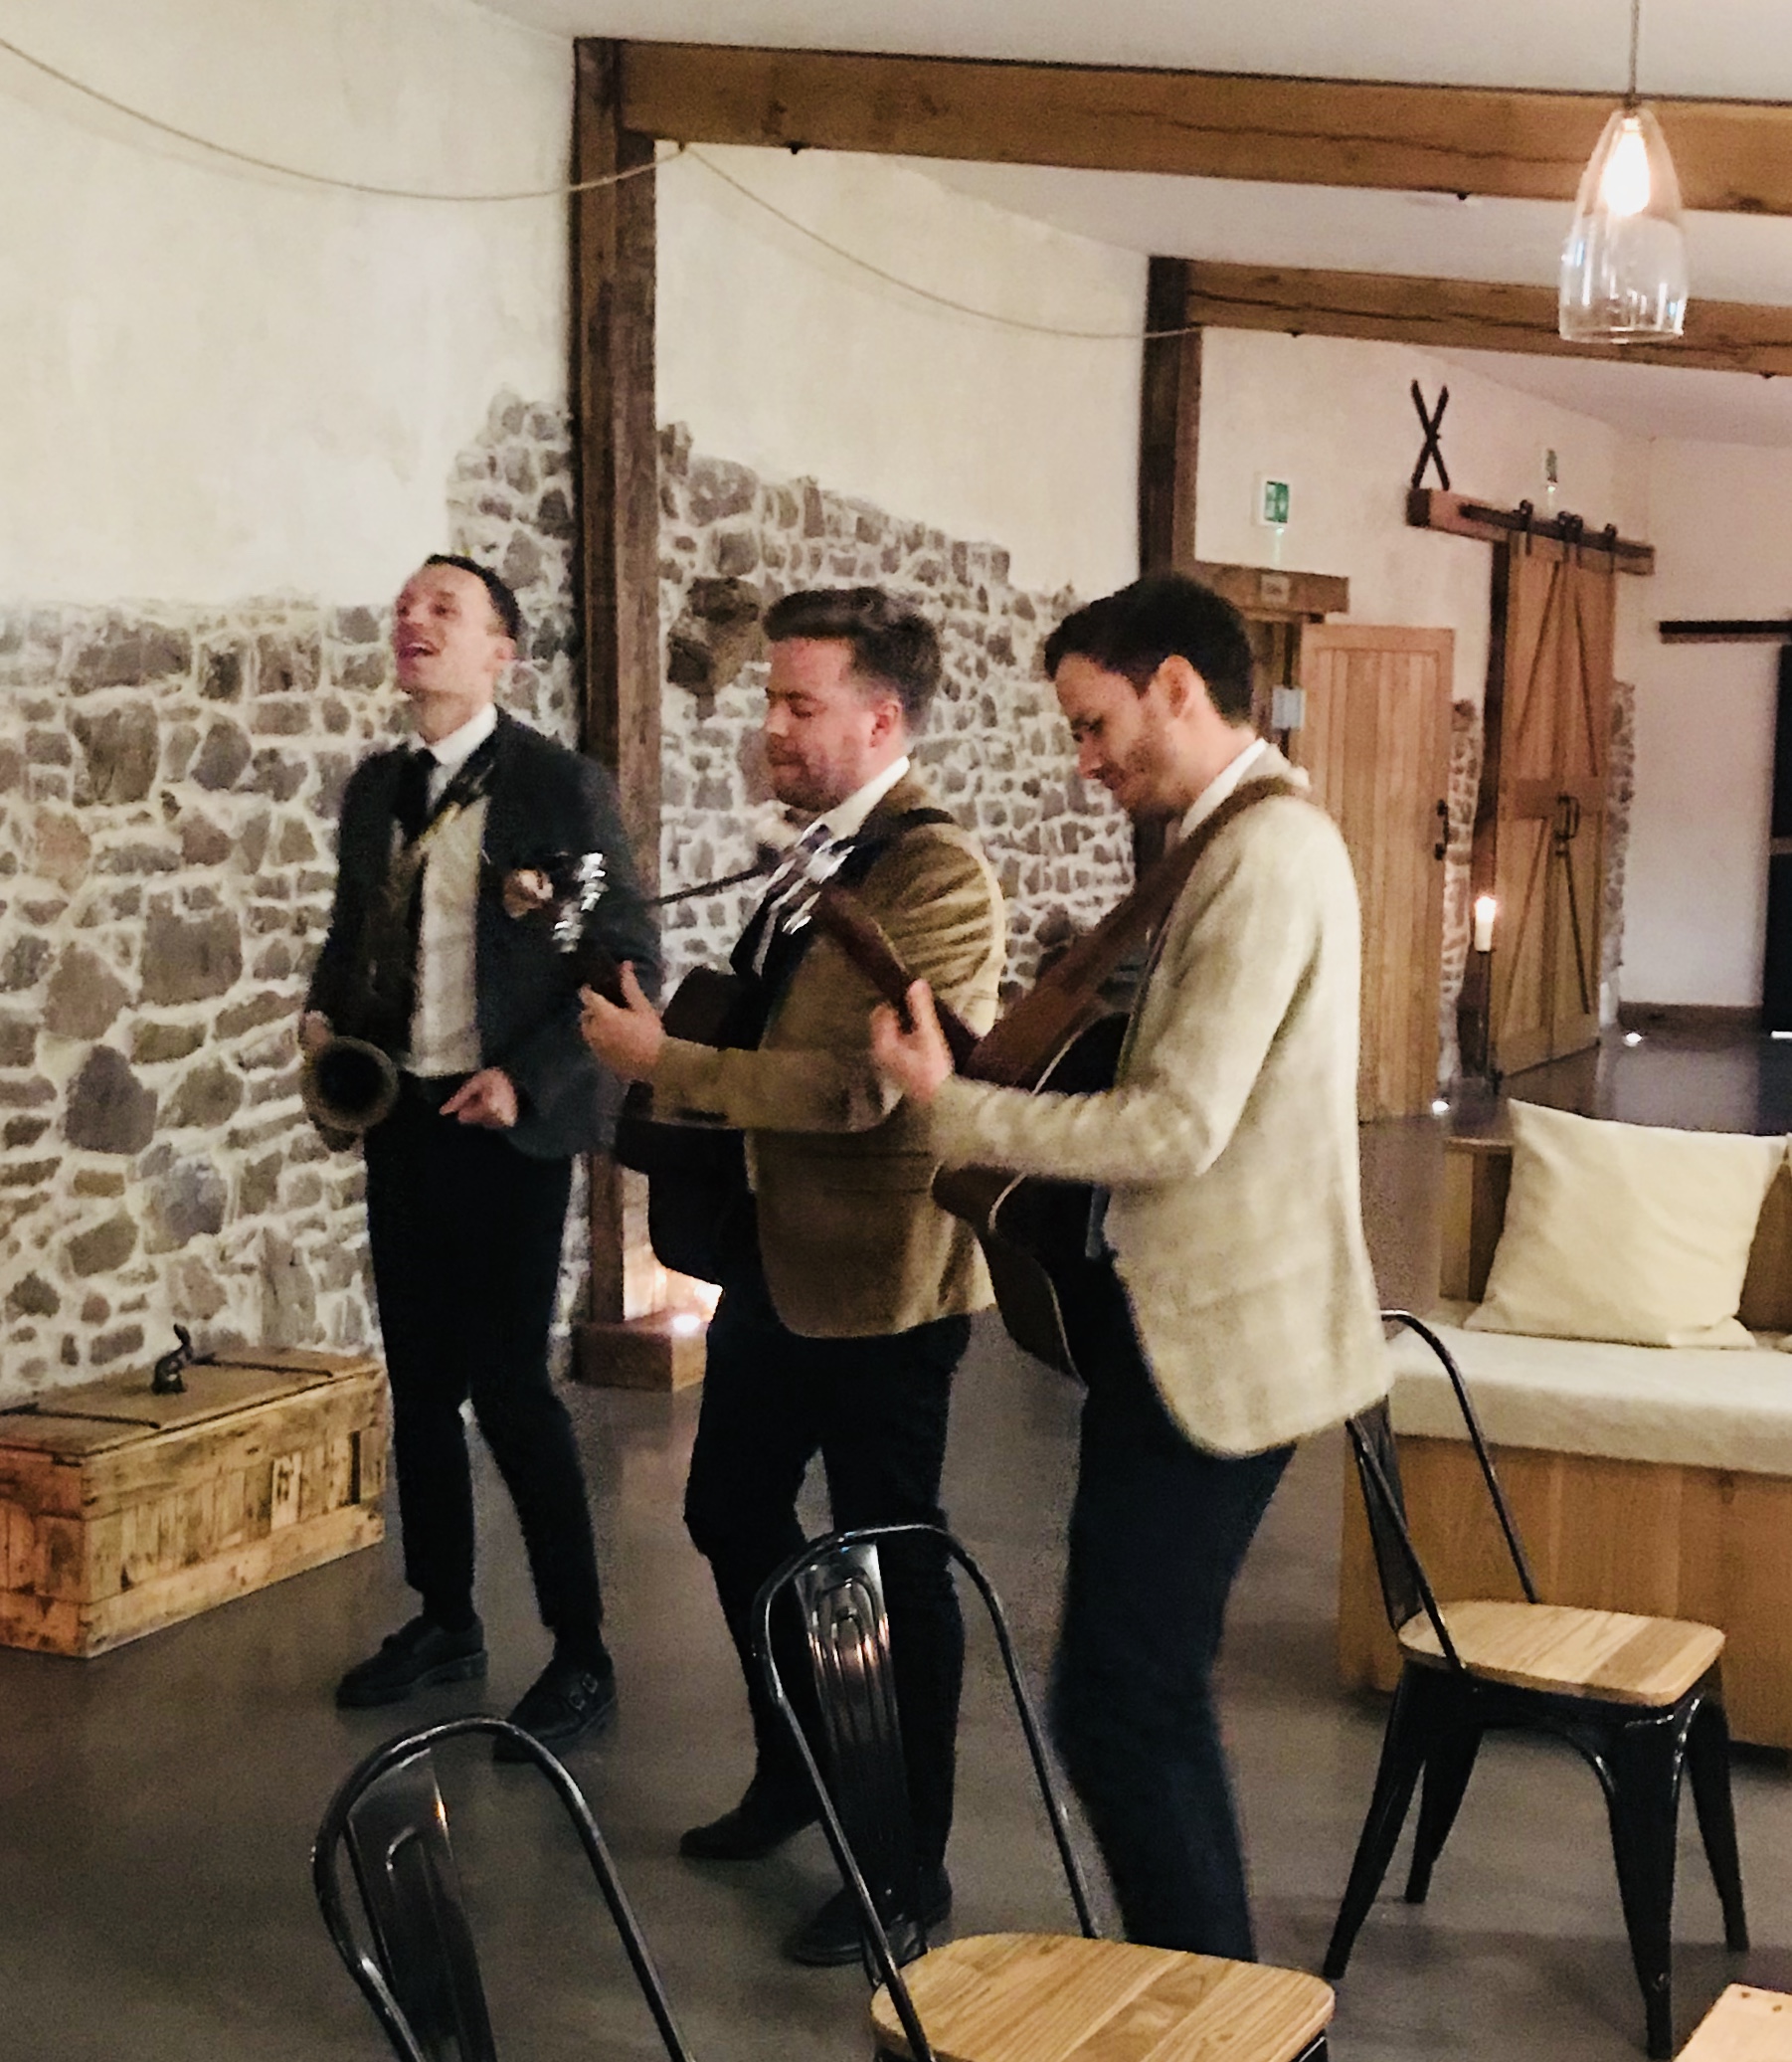 Wandering Hands performing at the opening of The Stable Barn at Upton Barn & Walled Garden